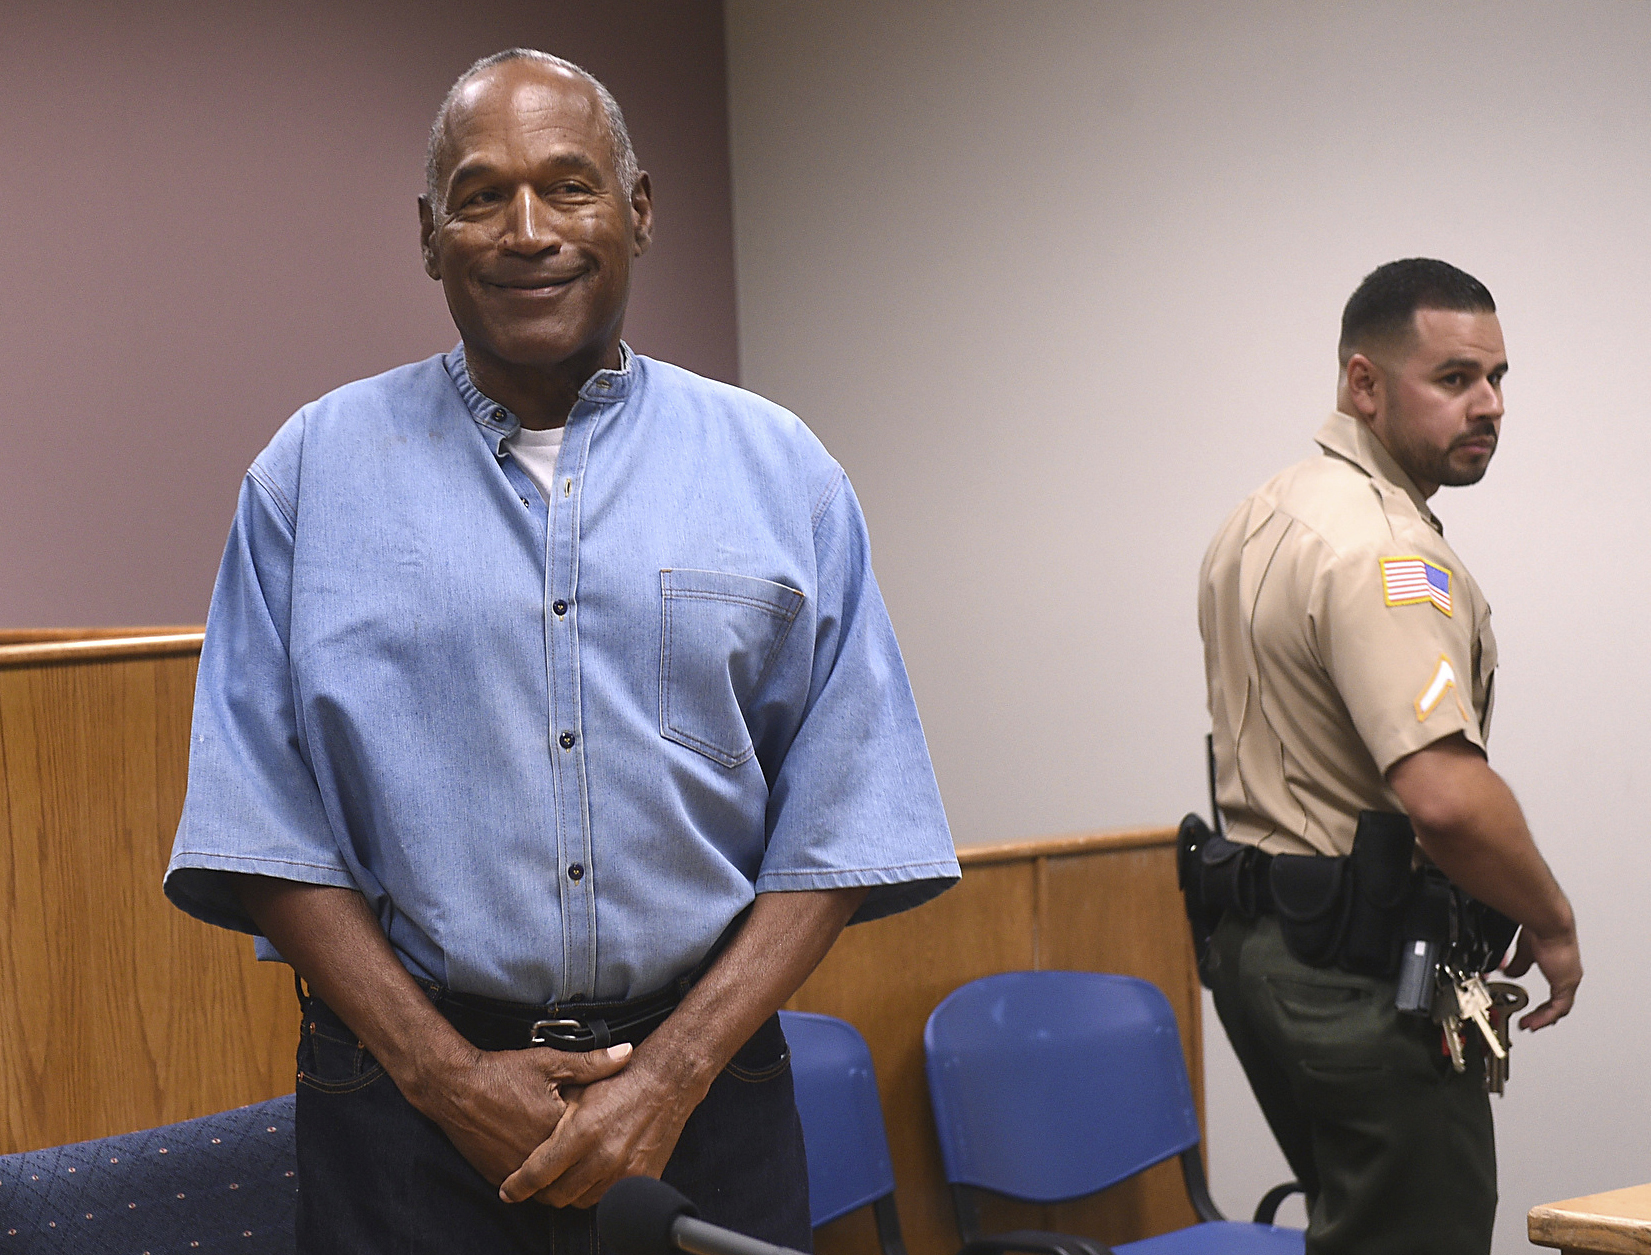 "Former NFL football star O.J. Simpson enters for his parole hearing at the Lovelock Correctional Center in Lovelock, Nev., on Thursday, July 20, 2017. "